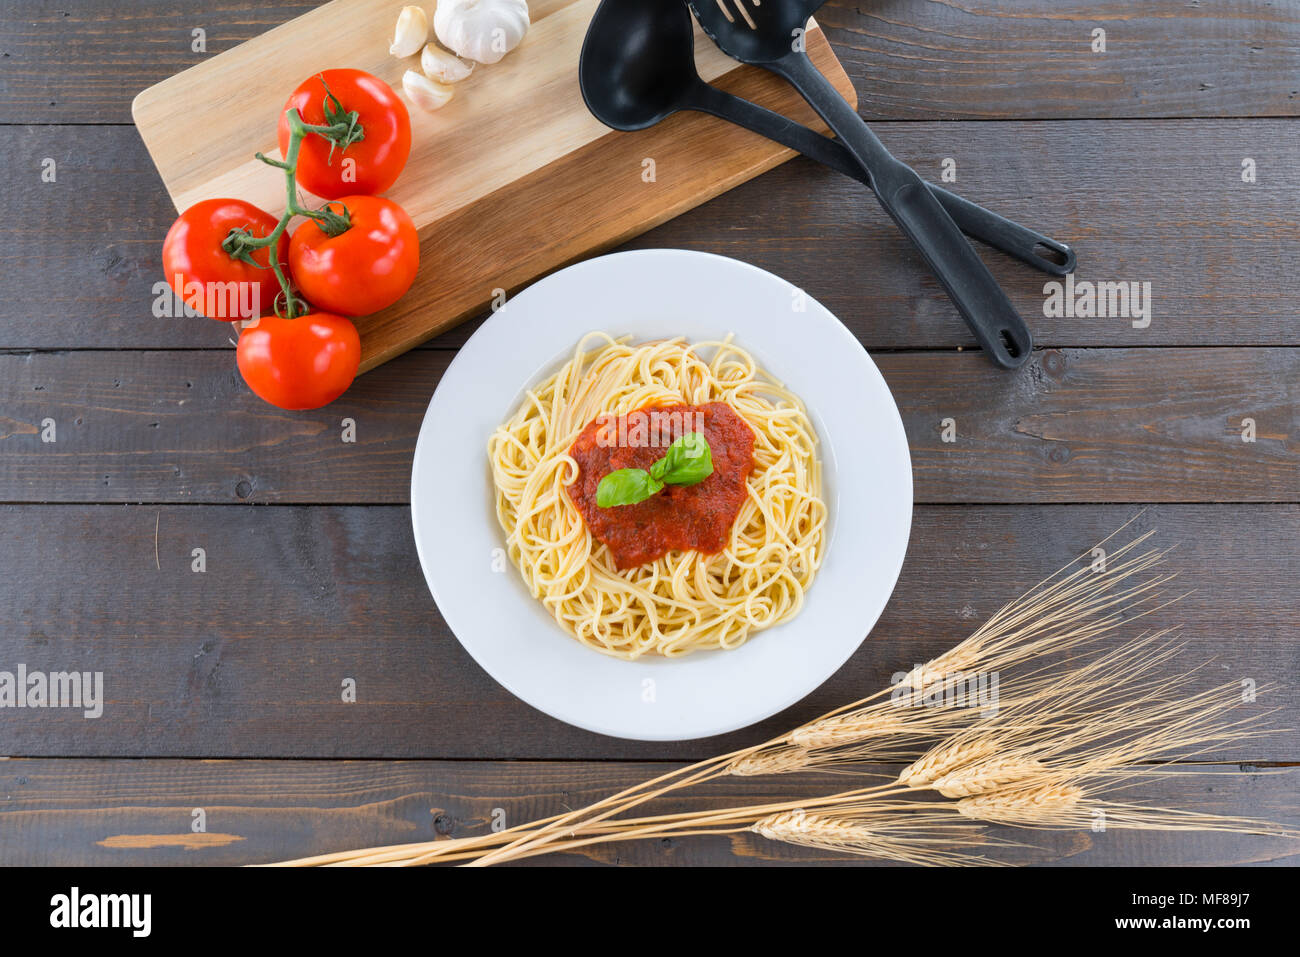 Plate of Spaghetti with tomato sauce and Basil Stock Photo